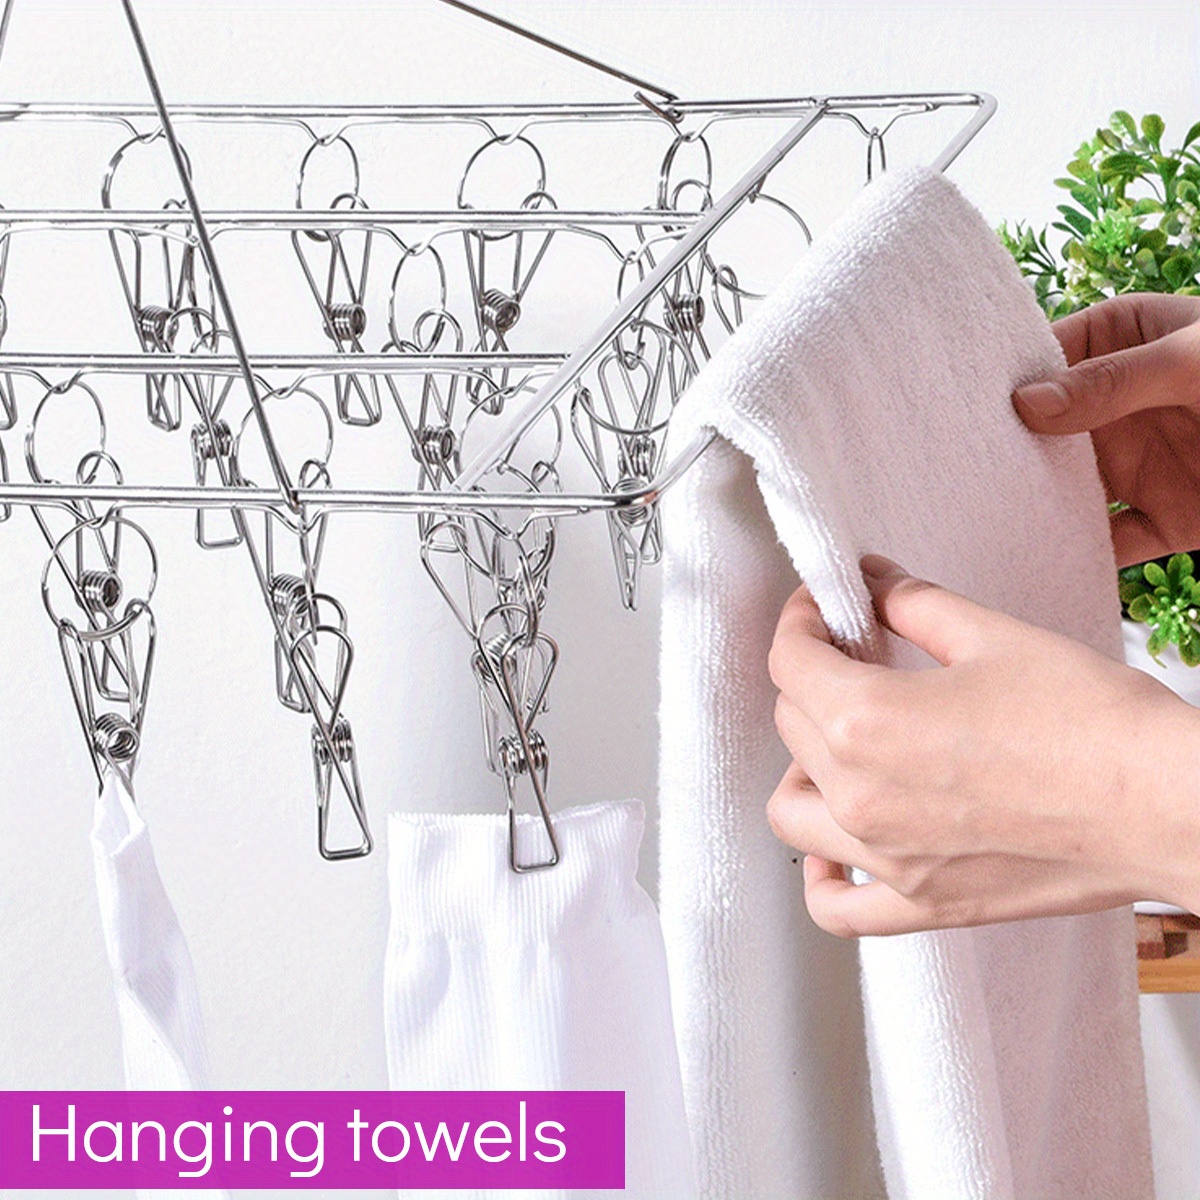 Foldable Hanging Drying Rack Portable Clothing Dryer for Hats Bras Gloves